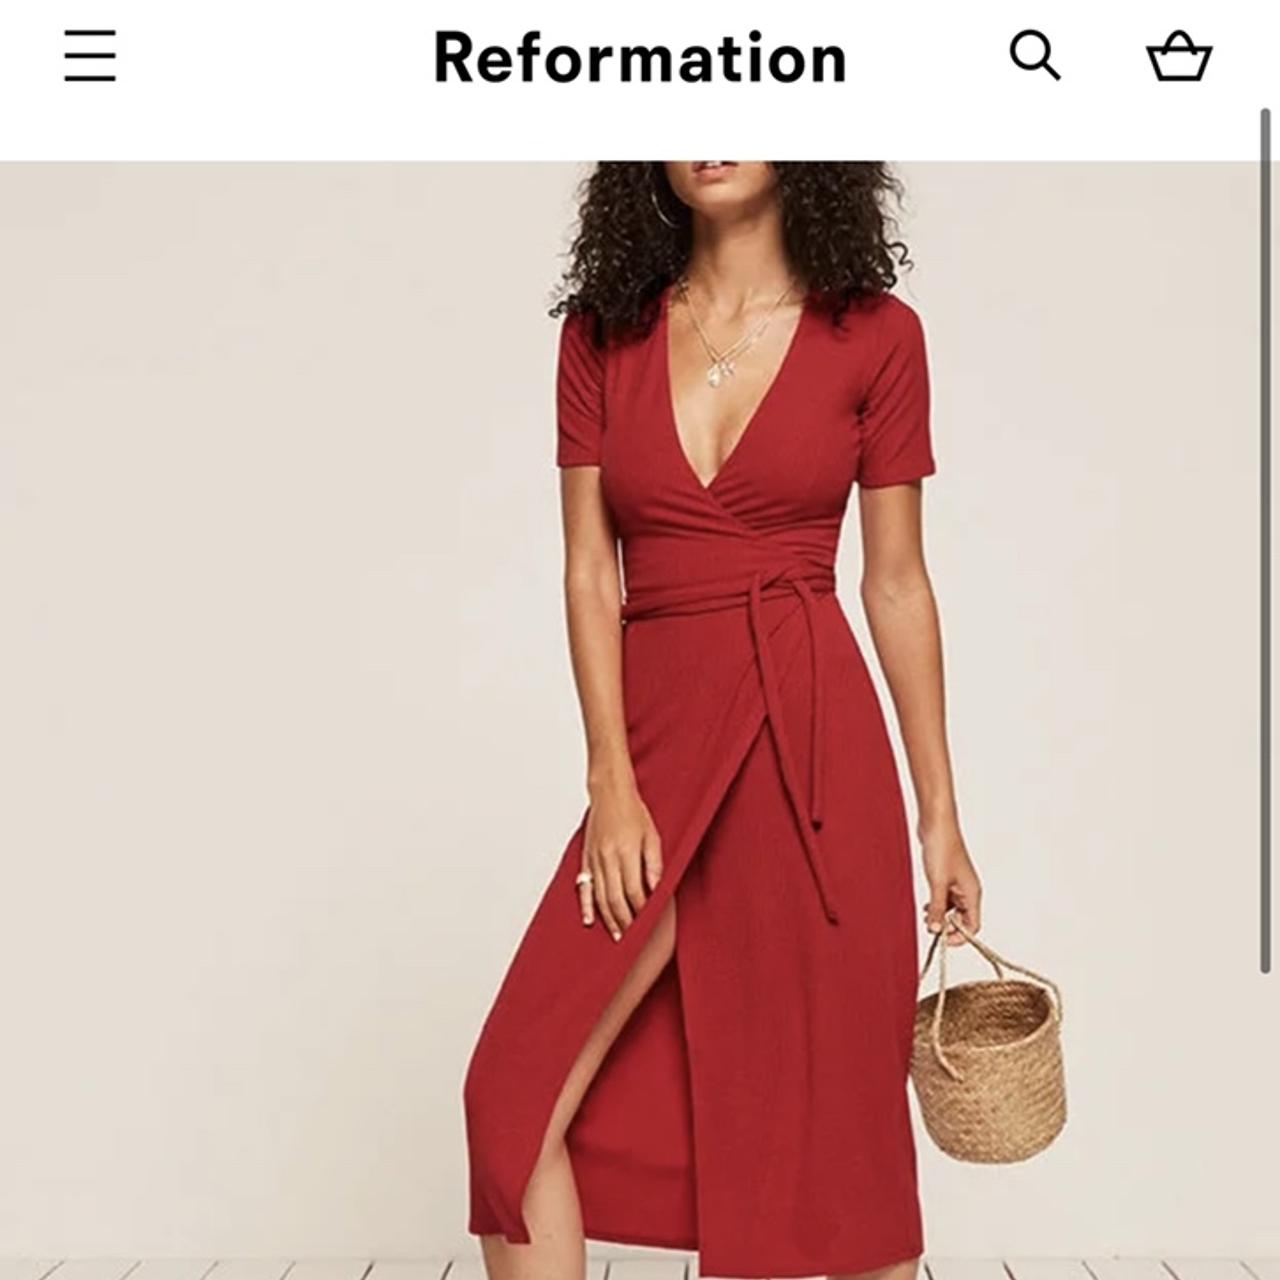 Red Reformation Wrap Dress never worn ...